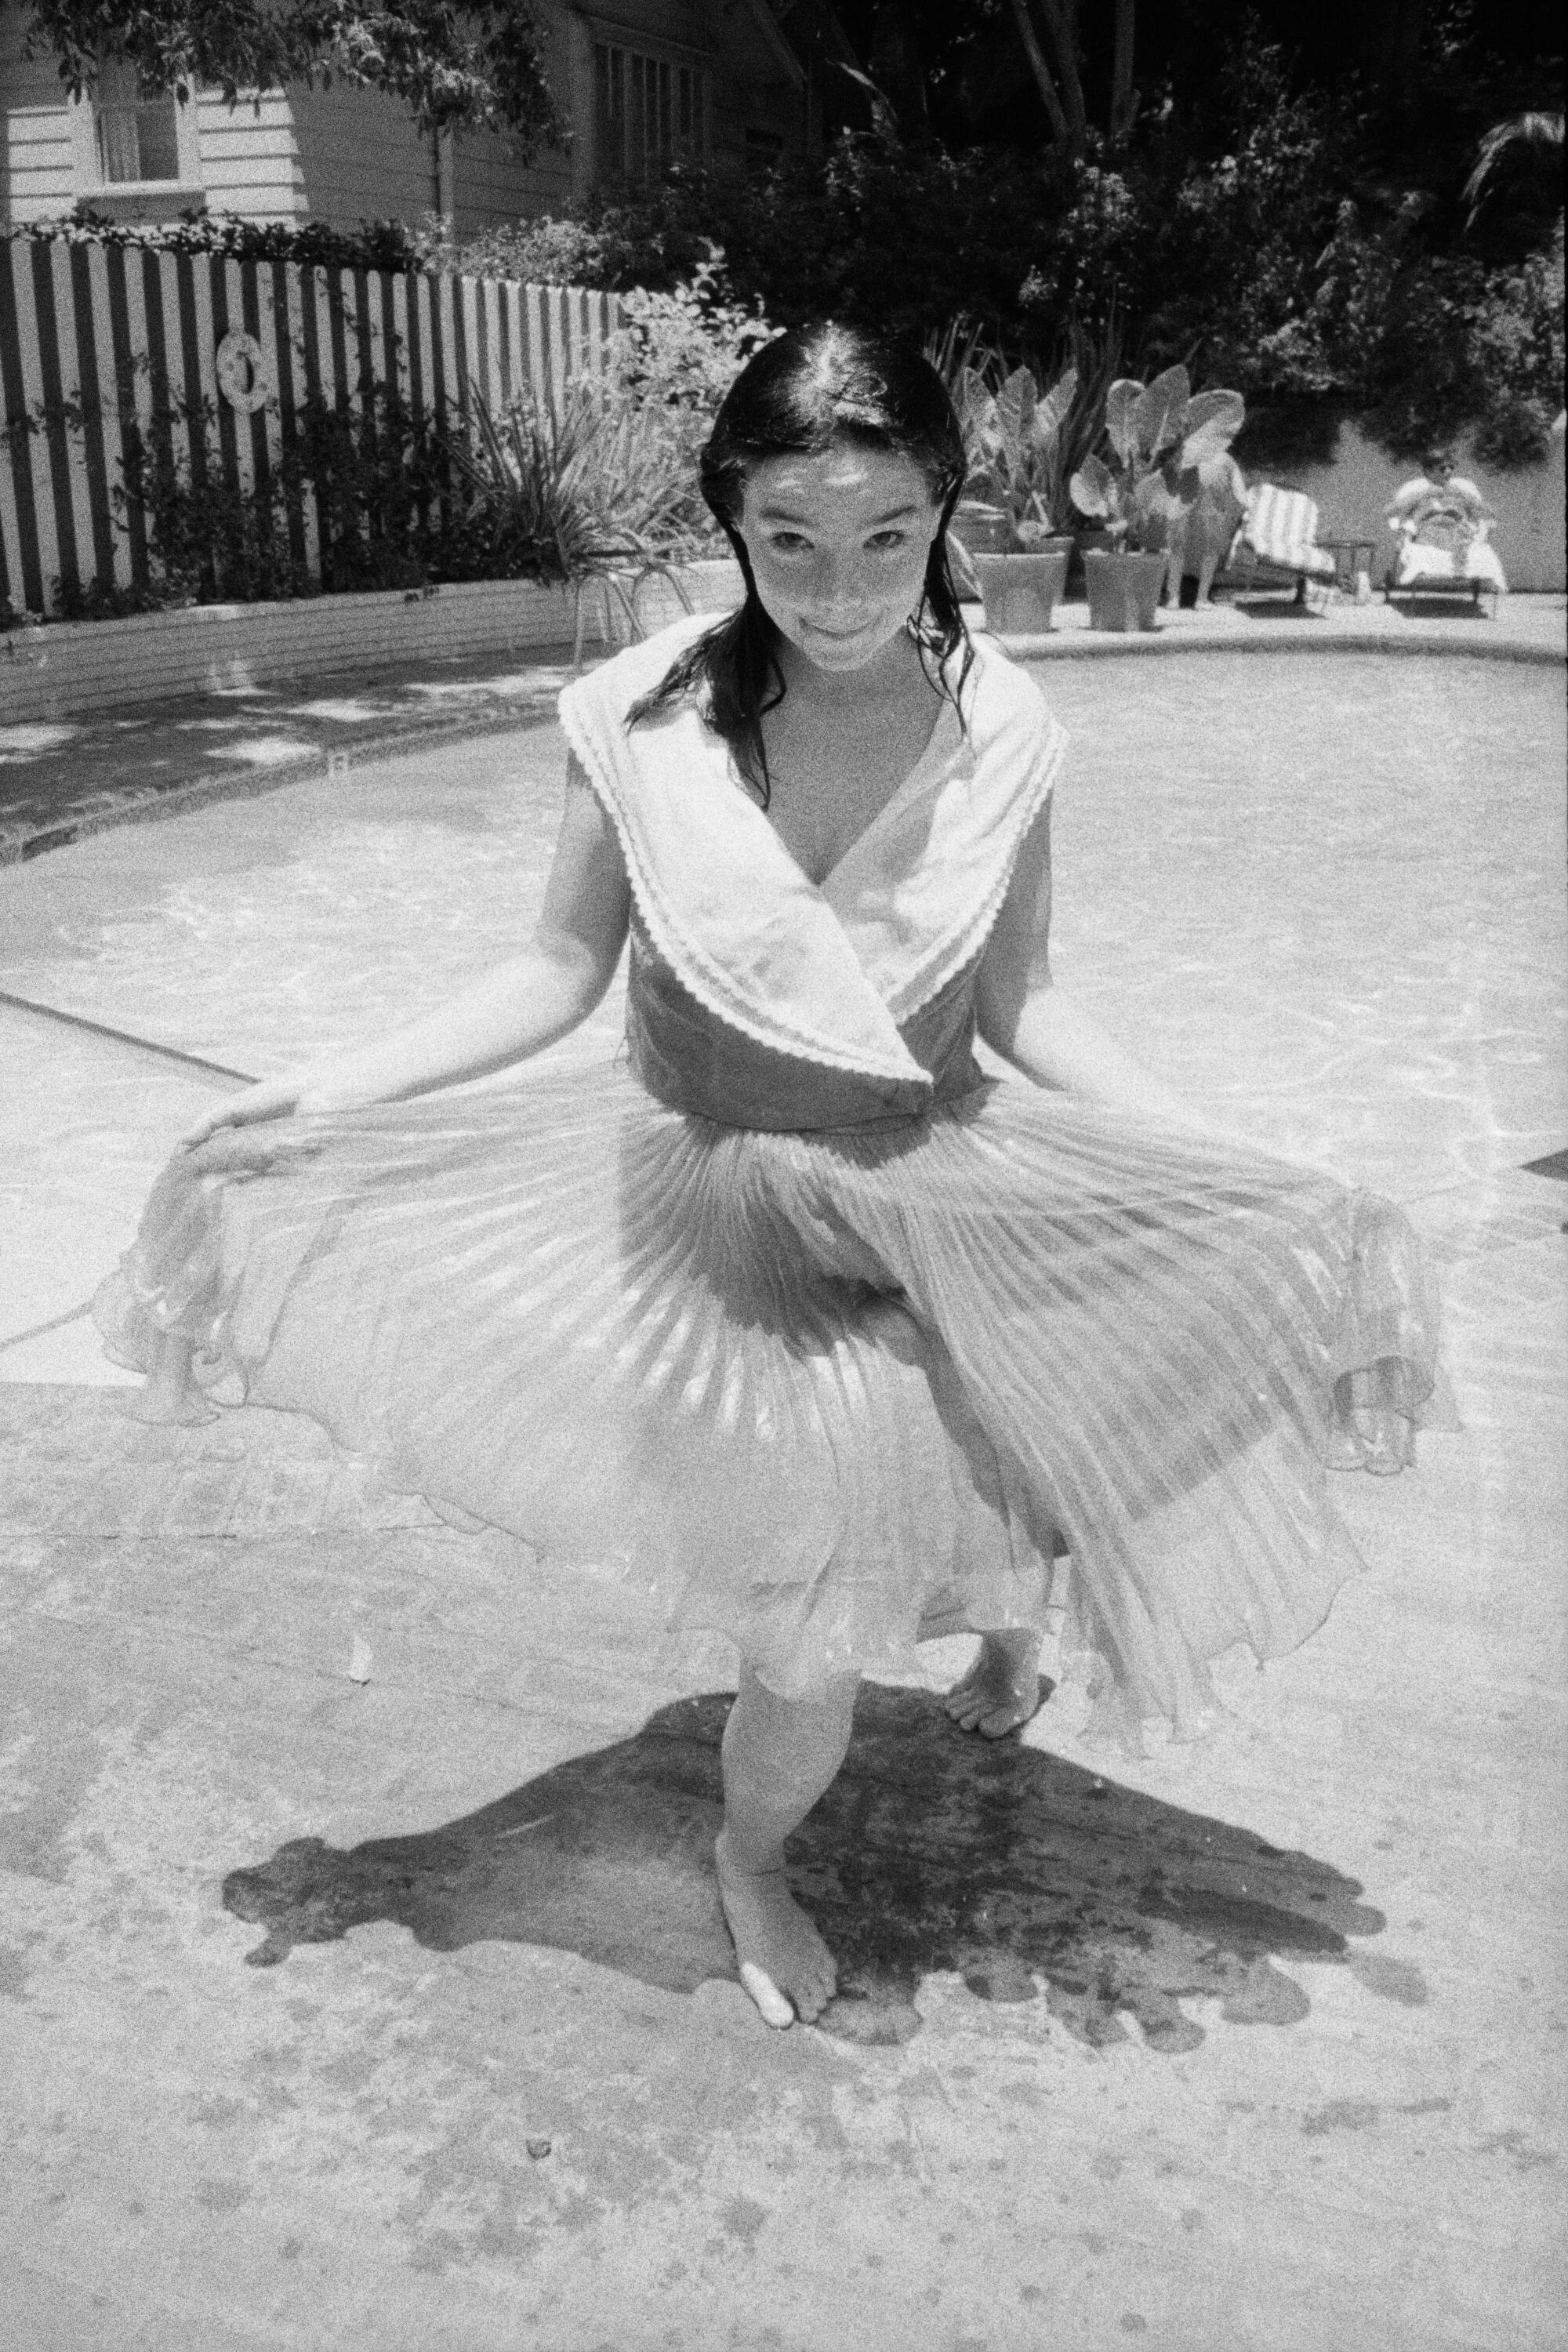 A black-and-white photo of Björk holding up the edges of her dress as she stands in front of a swimming pool.